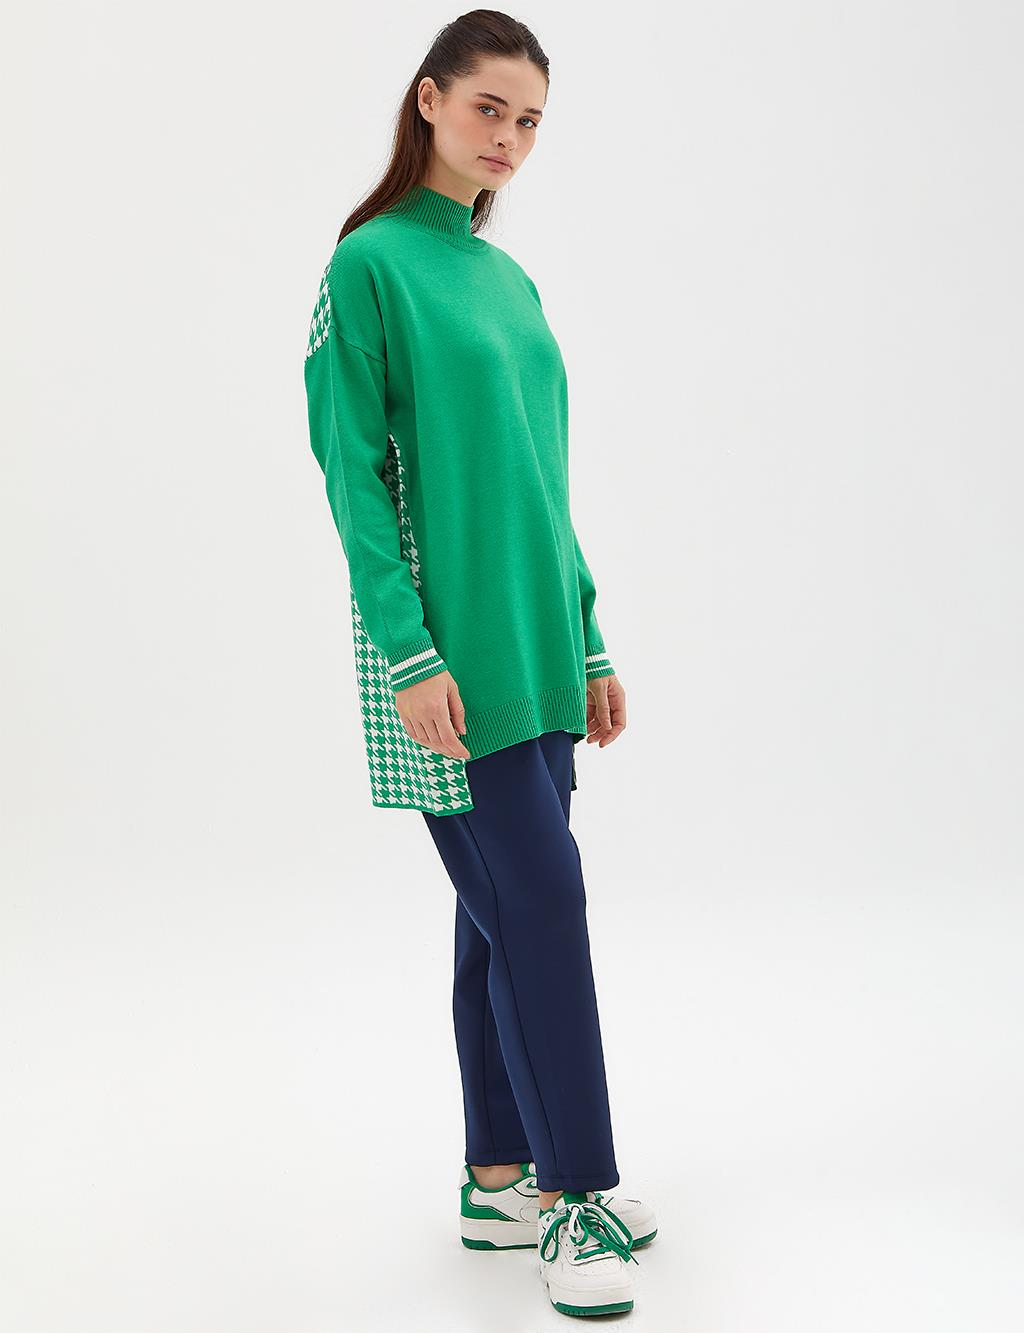 Houndstooth Patterned Knitwear Tunic Green